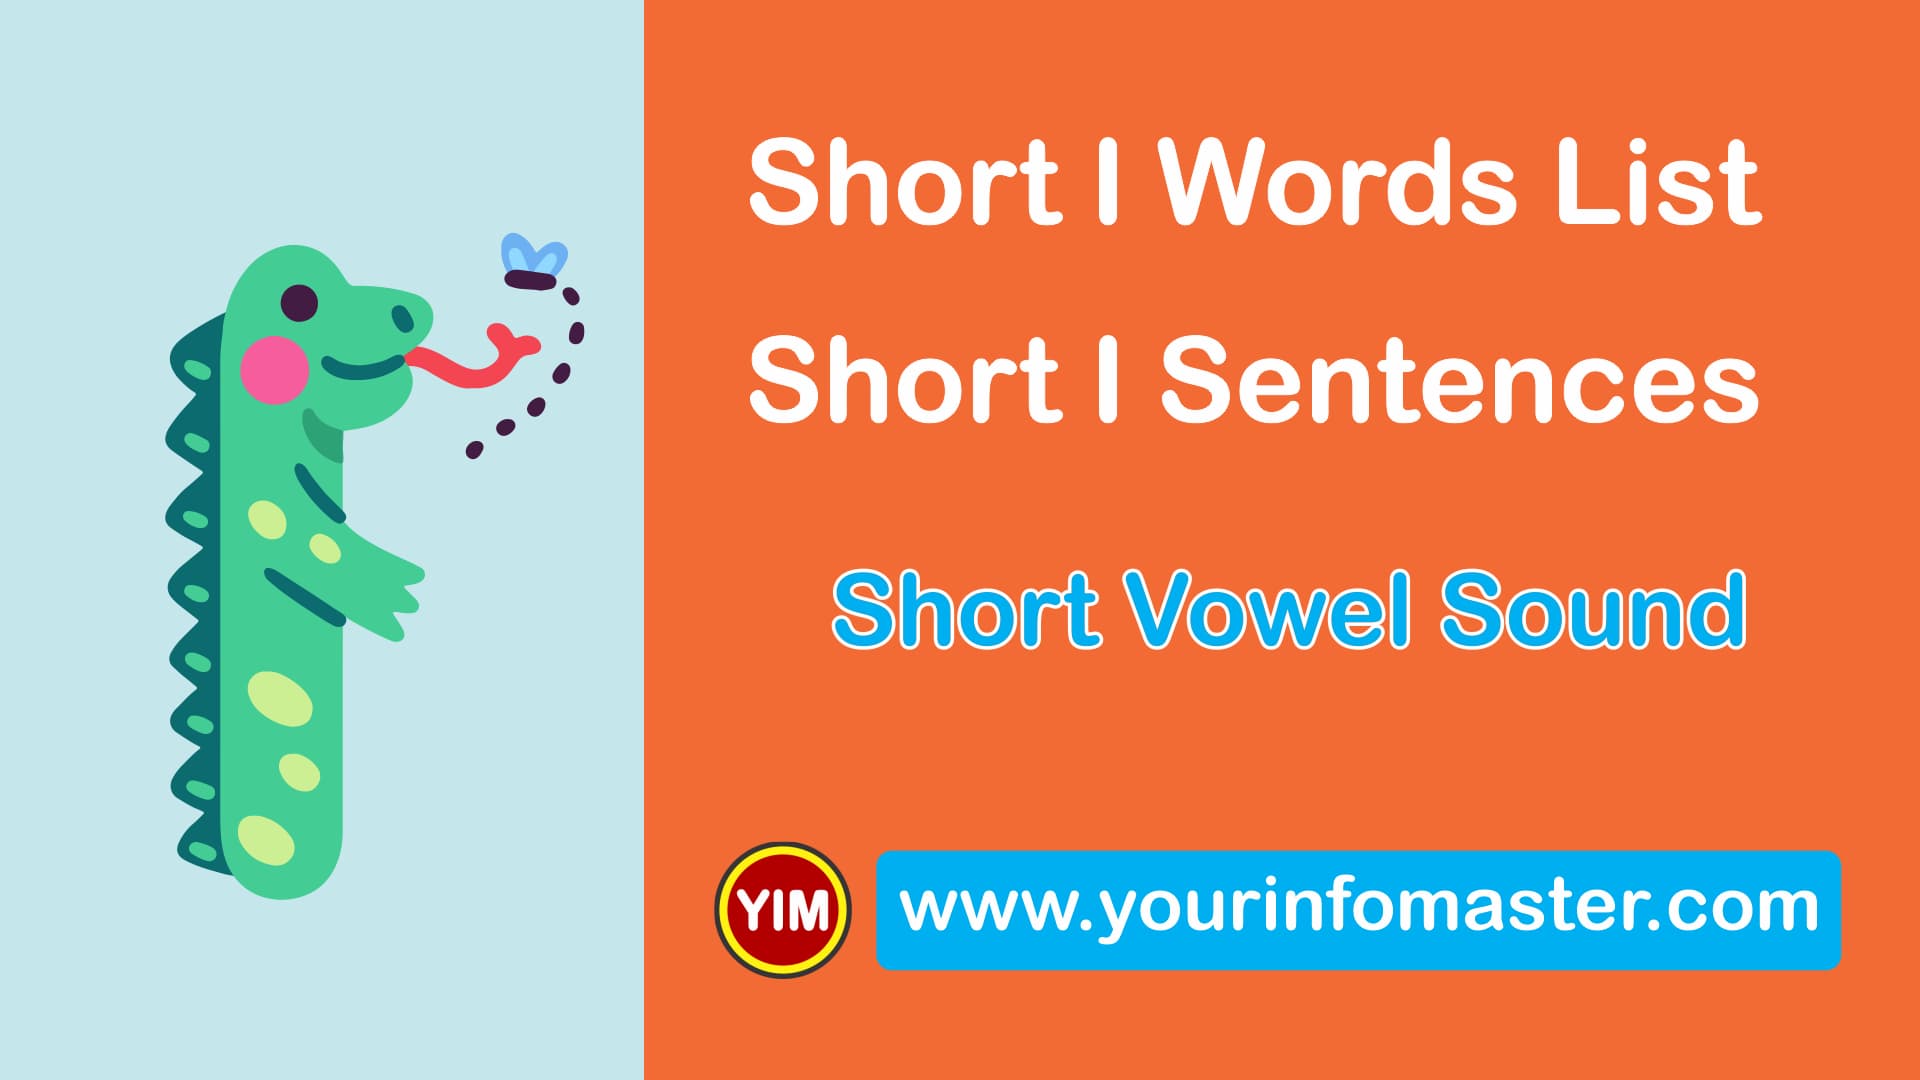 awesome words, cool short words, cool words, i words, Learning Spellings, Long versus Short Vowels, short I sound words, short I words, Short I Words List, Short I Words Worksheets, Short Vowel, Short Vowel Examples, Short Vowel Sound, Short Vowel Sounds Examples, Using Short Vowel Sounds, Vowel I Sound, Vowel Pronunciation, What is a Vowel, word of the day for kids